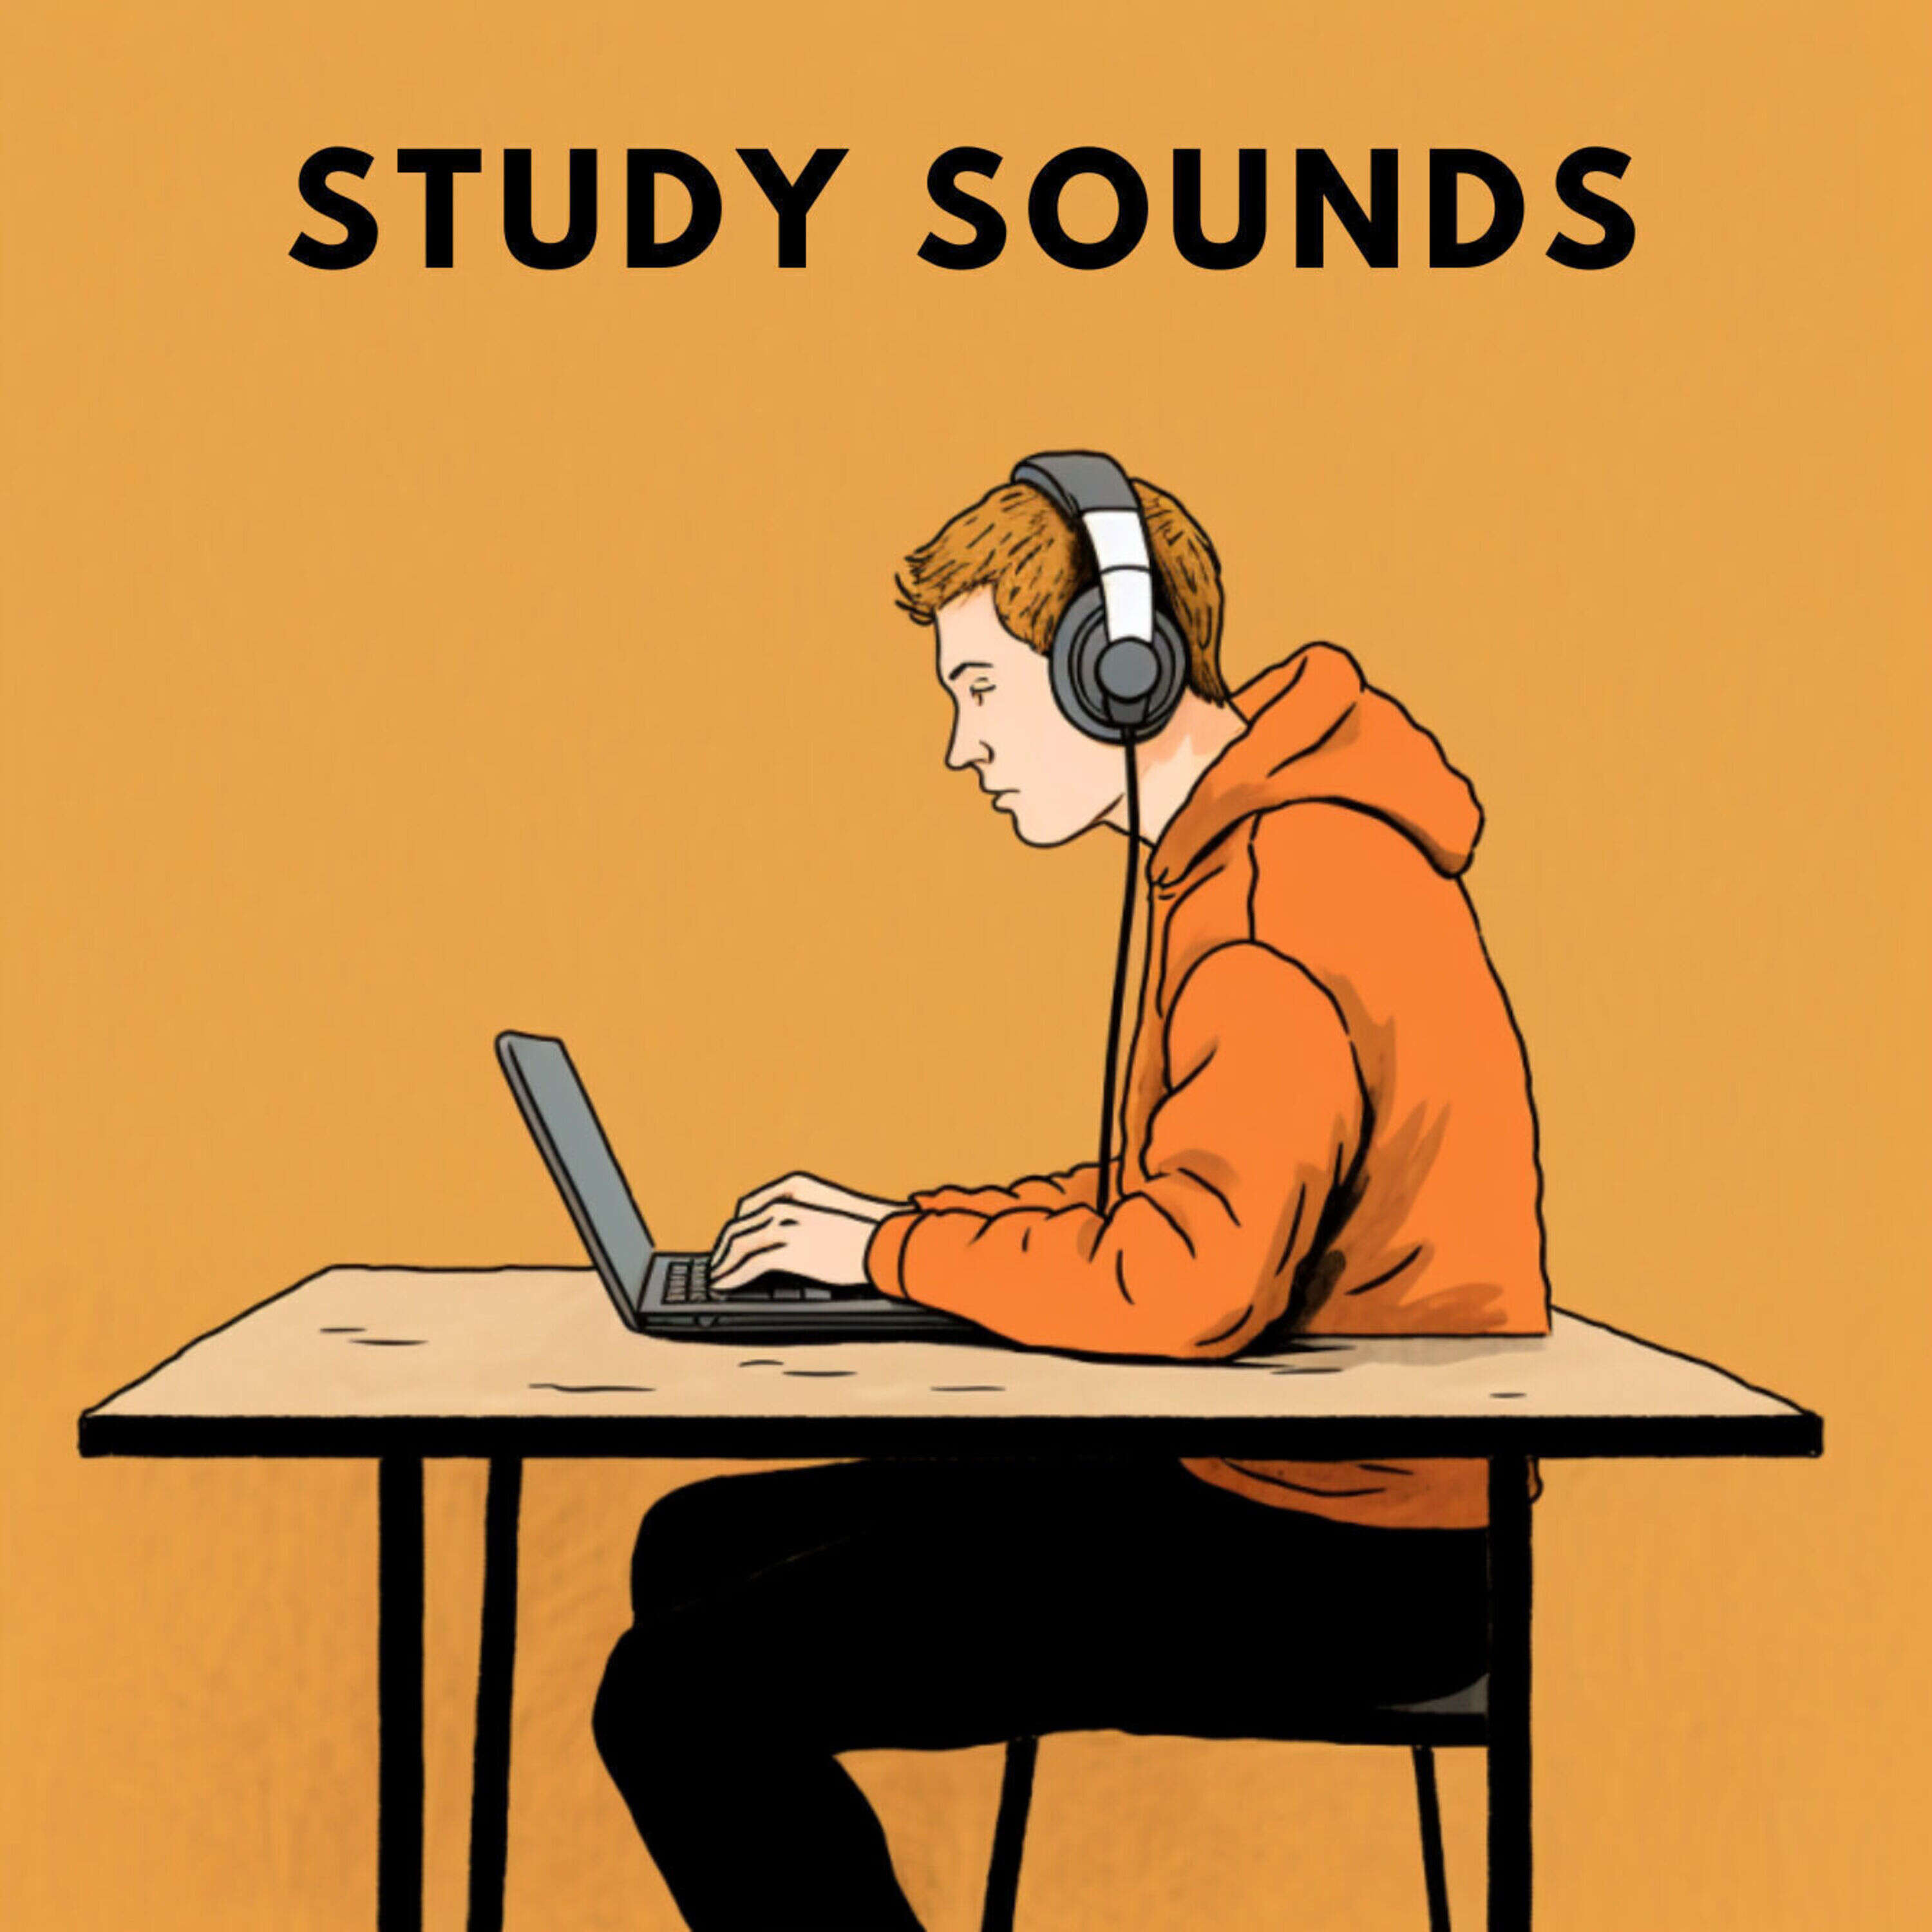 Study sounds | Background sounds for Focus and Studying, ADHD Relief sounds